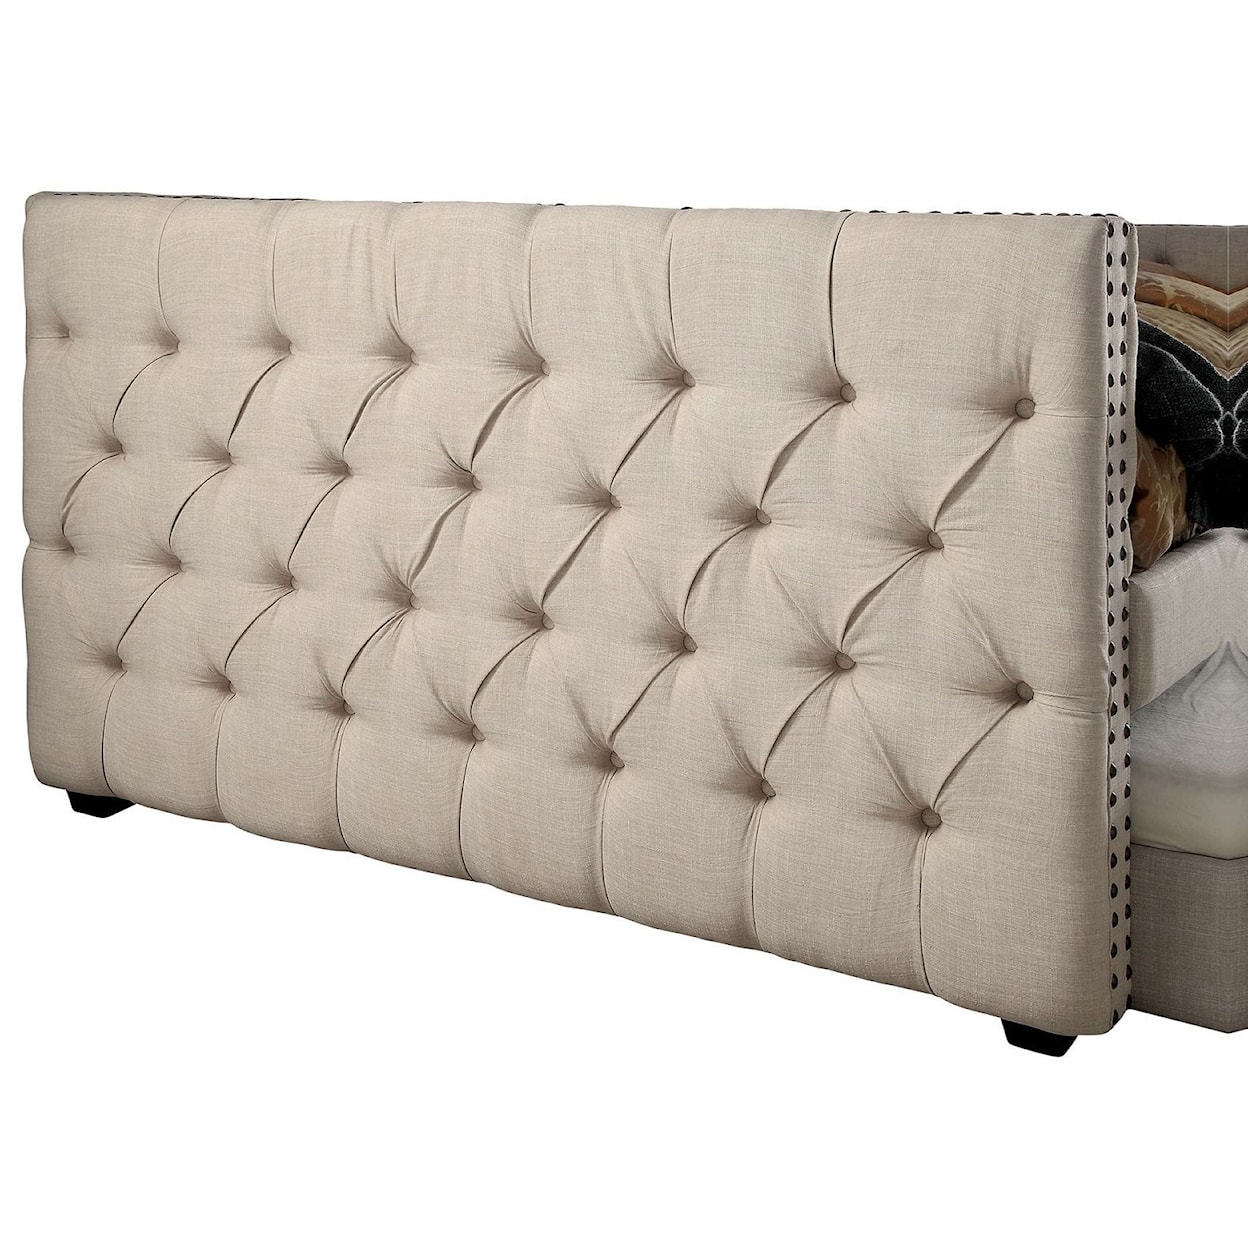 Furniture of America Suzanne Full Daybed with Trundle